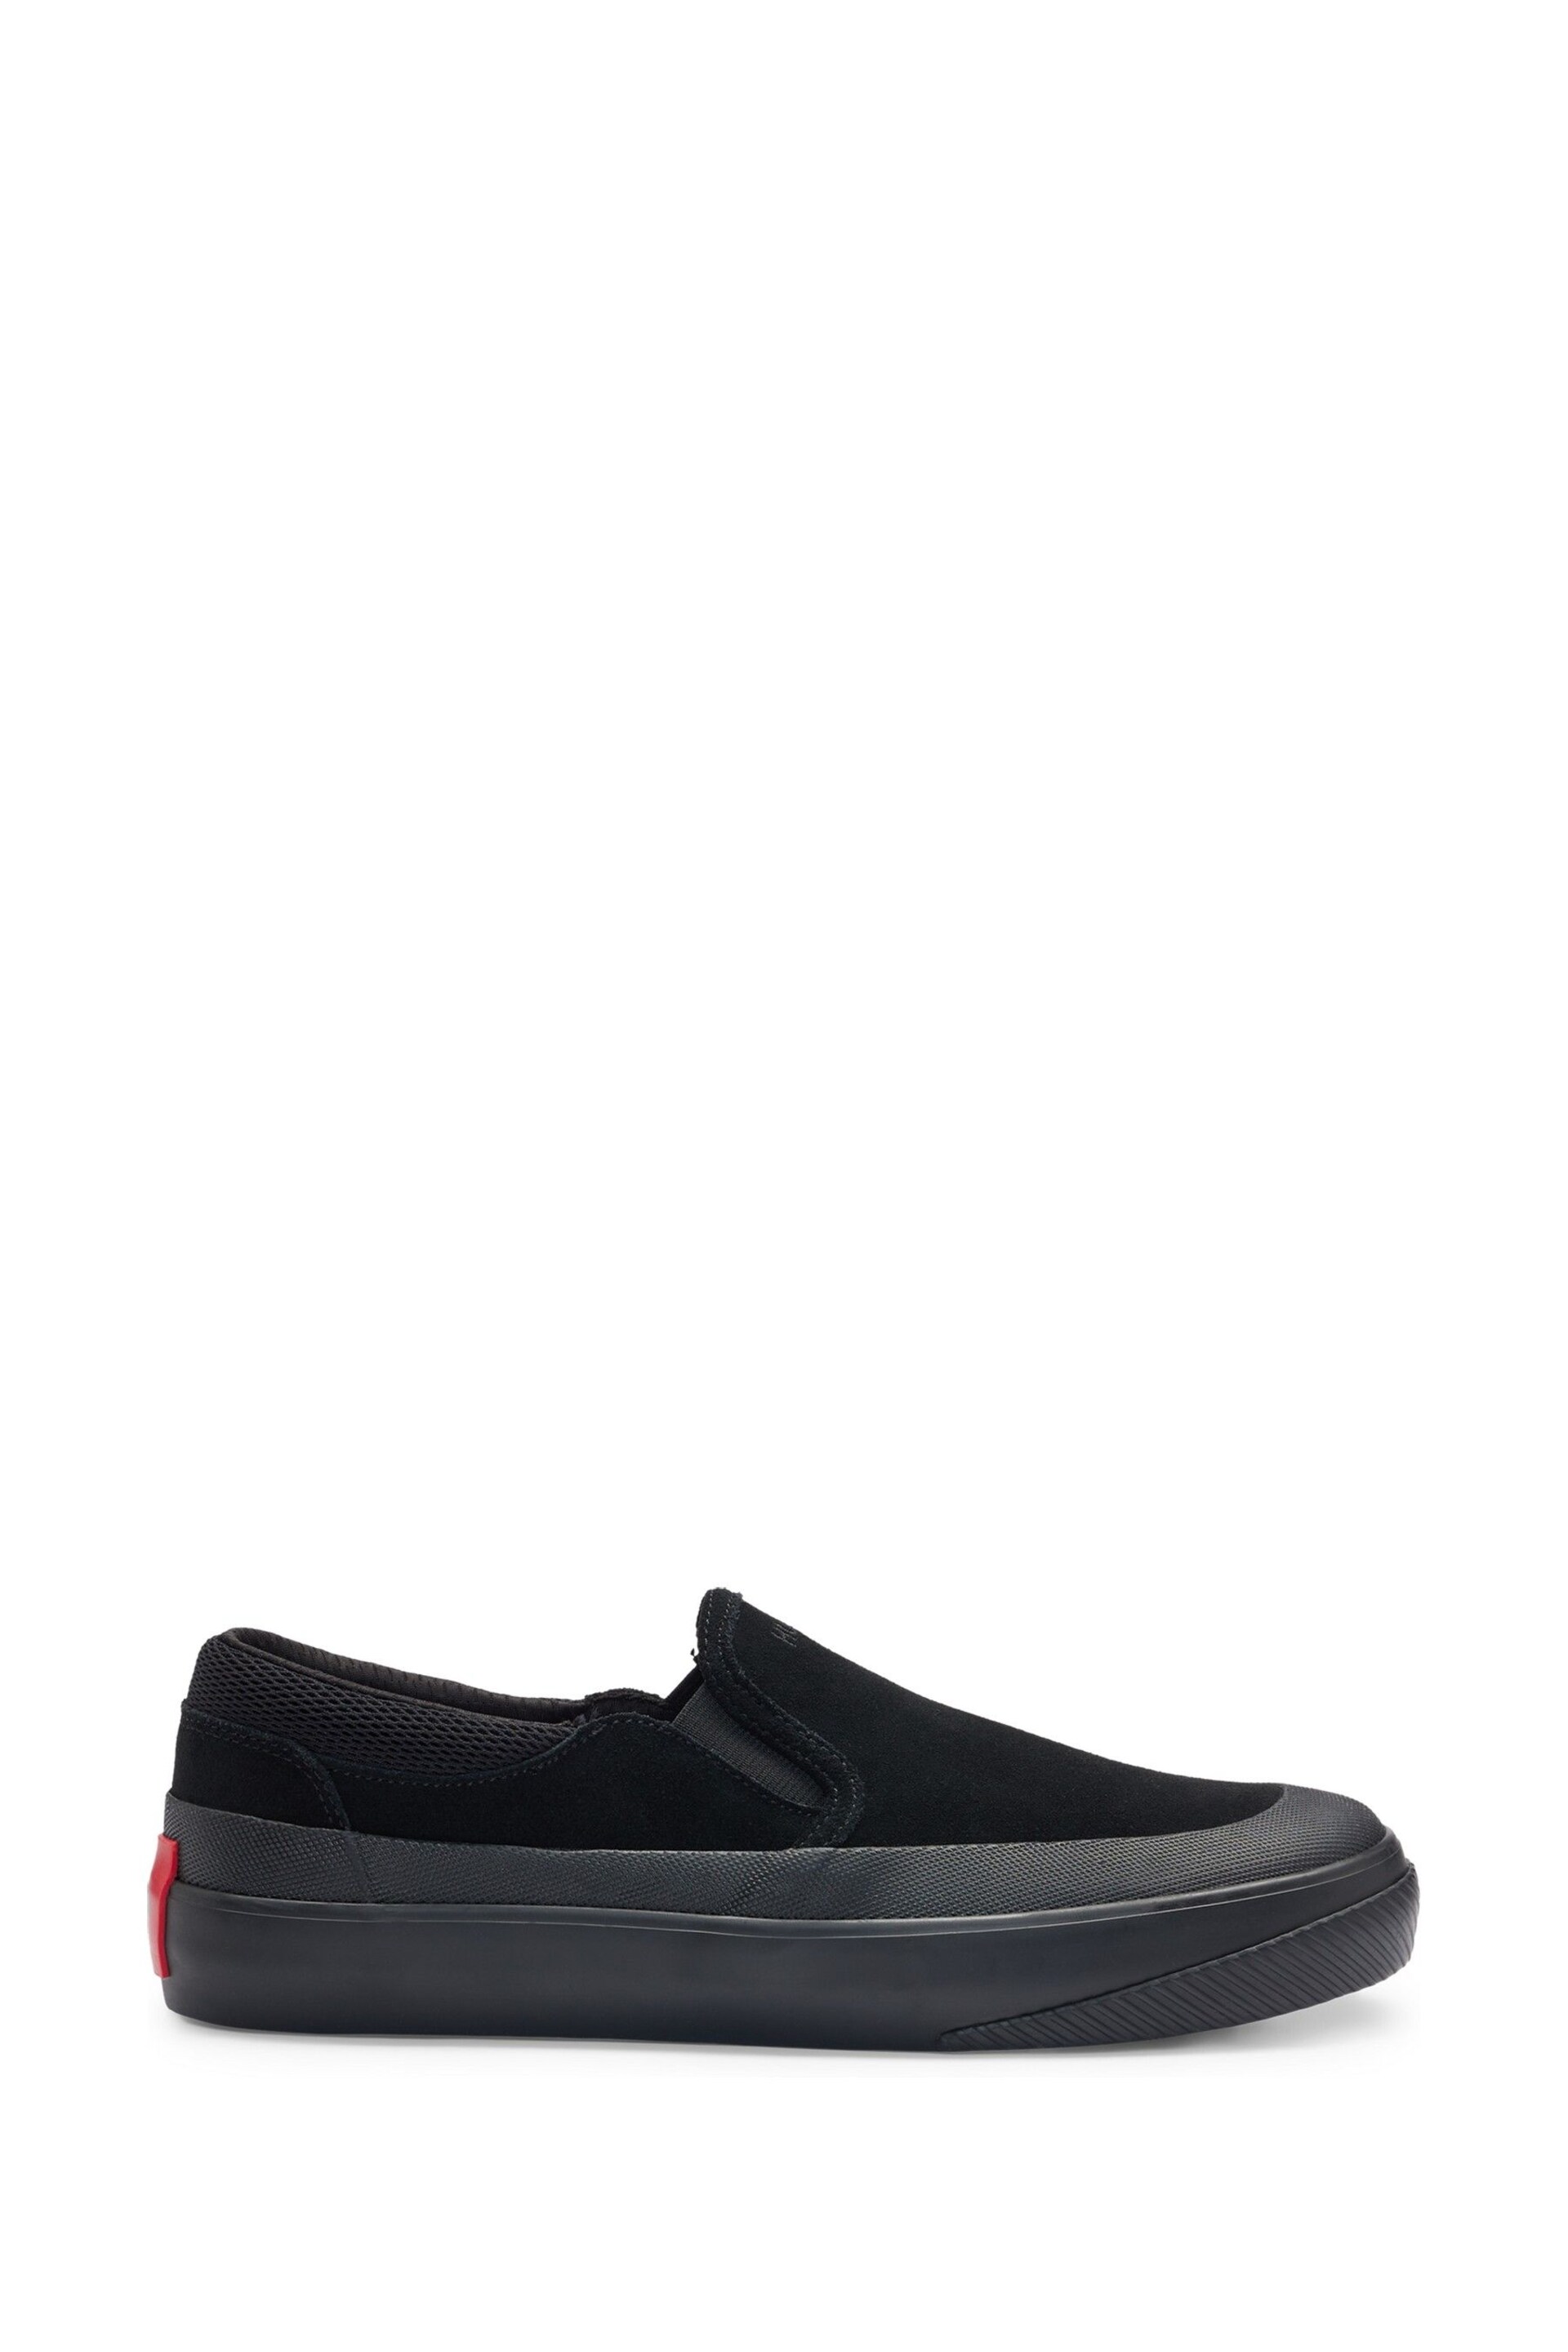 HUGO Suede Slip-on Shoes With Signature Slogan - Image 1 of 5